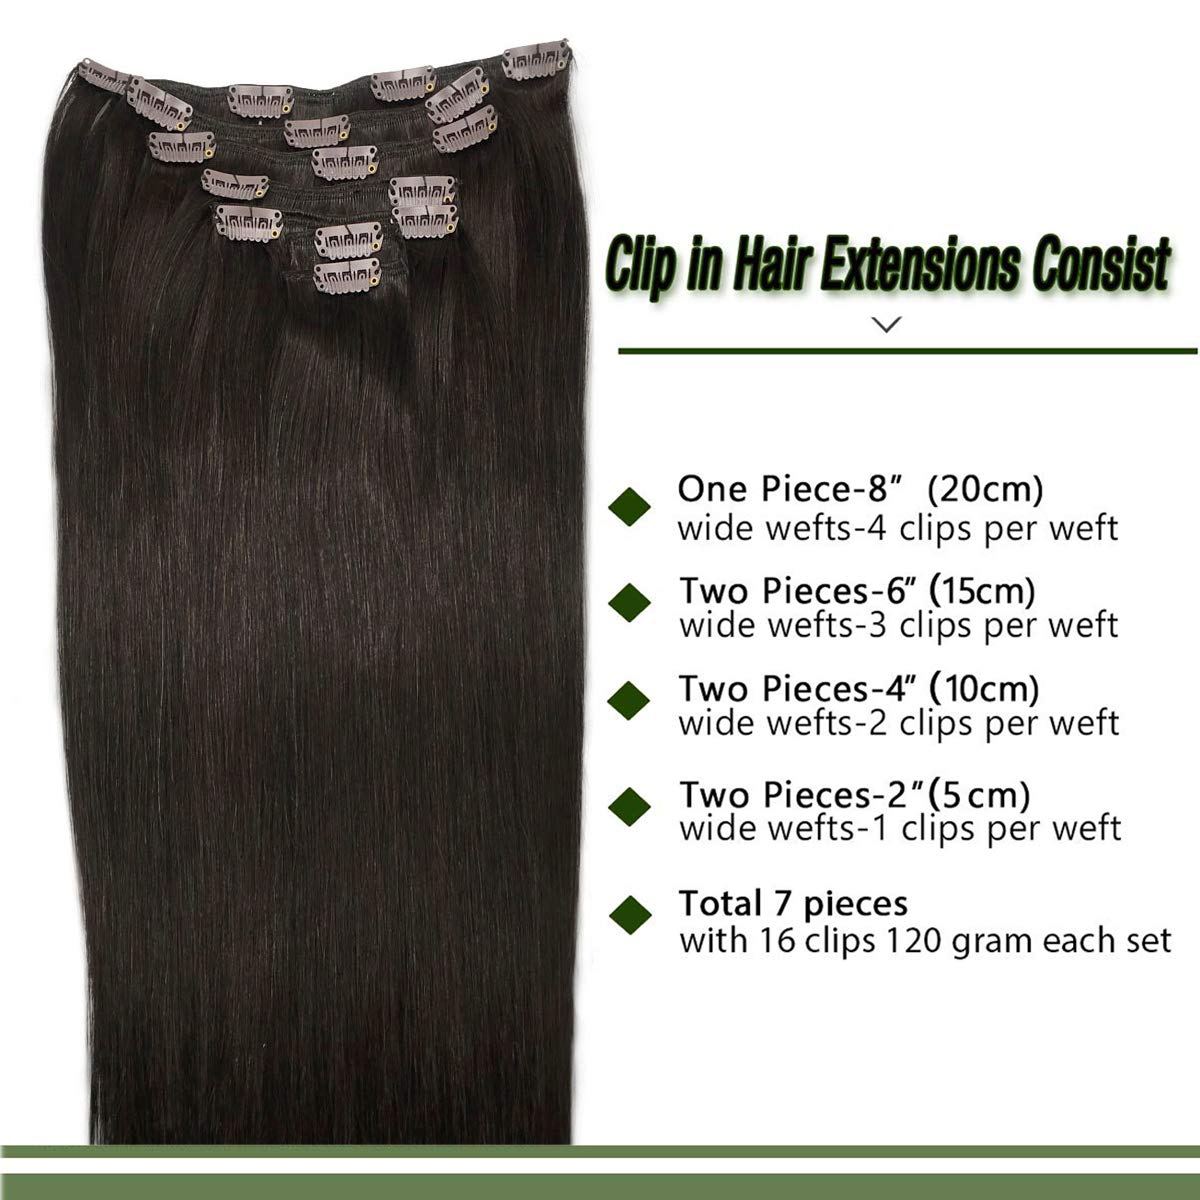 Clip in hair extensions consist